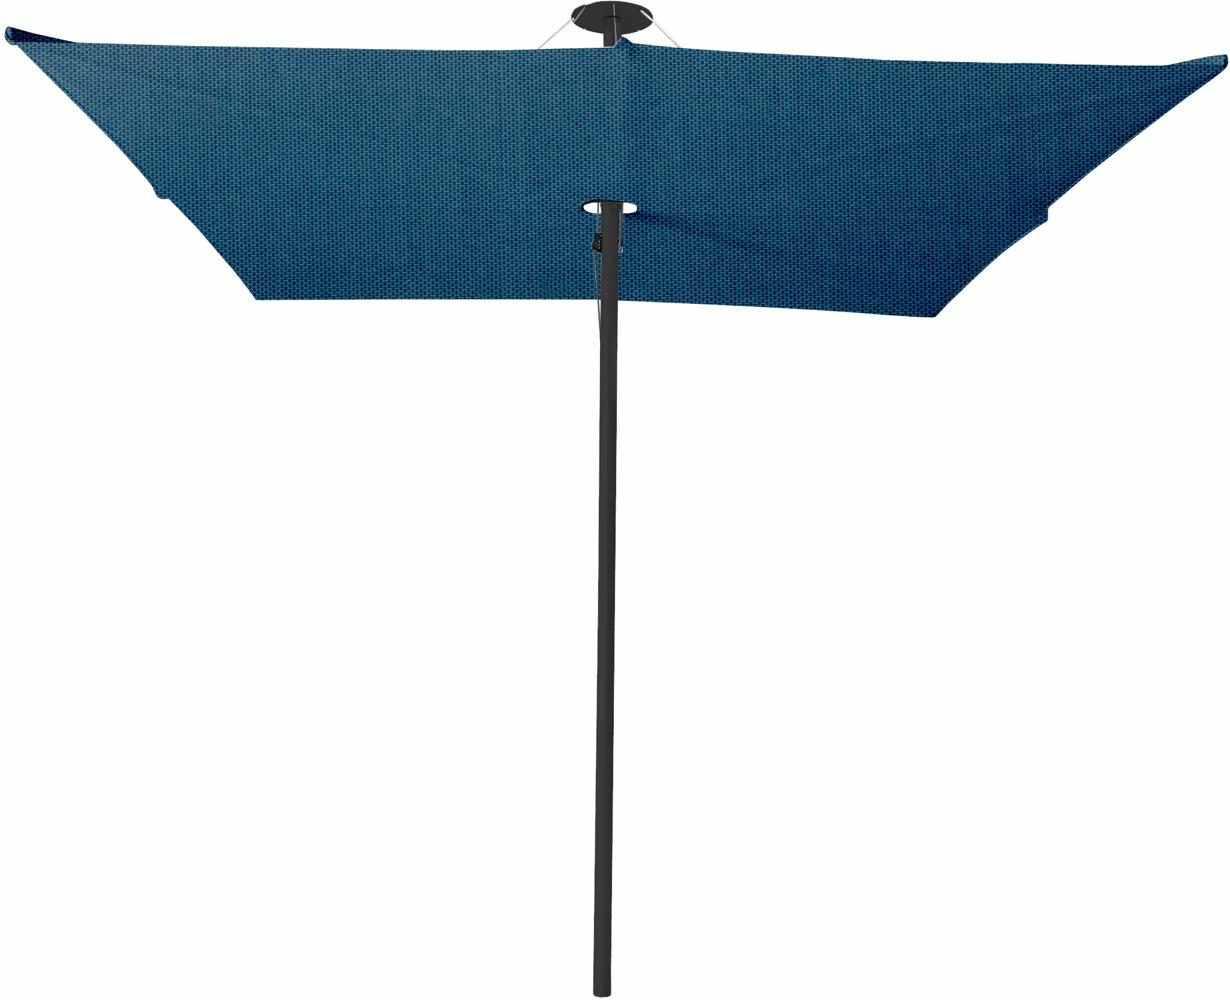 Infina center post umbrella, 3 m square, with frame in Dusk and Colorum BlueStorm canopy.